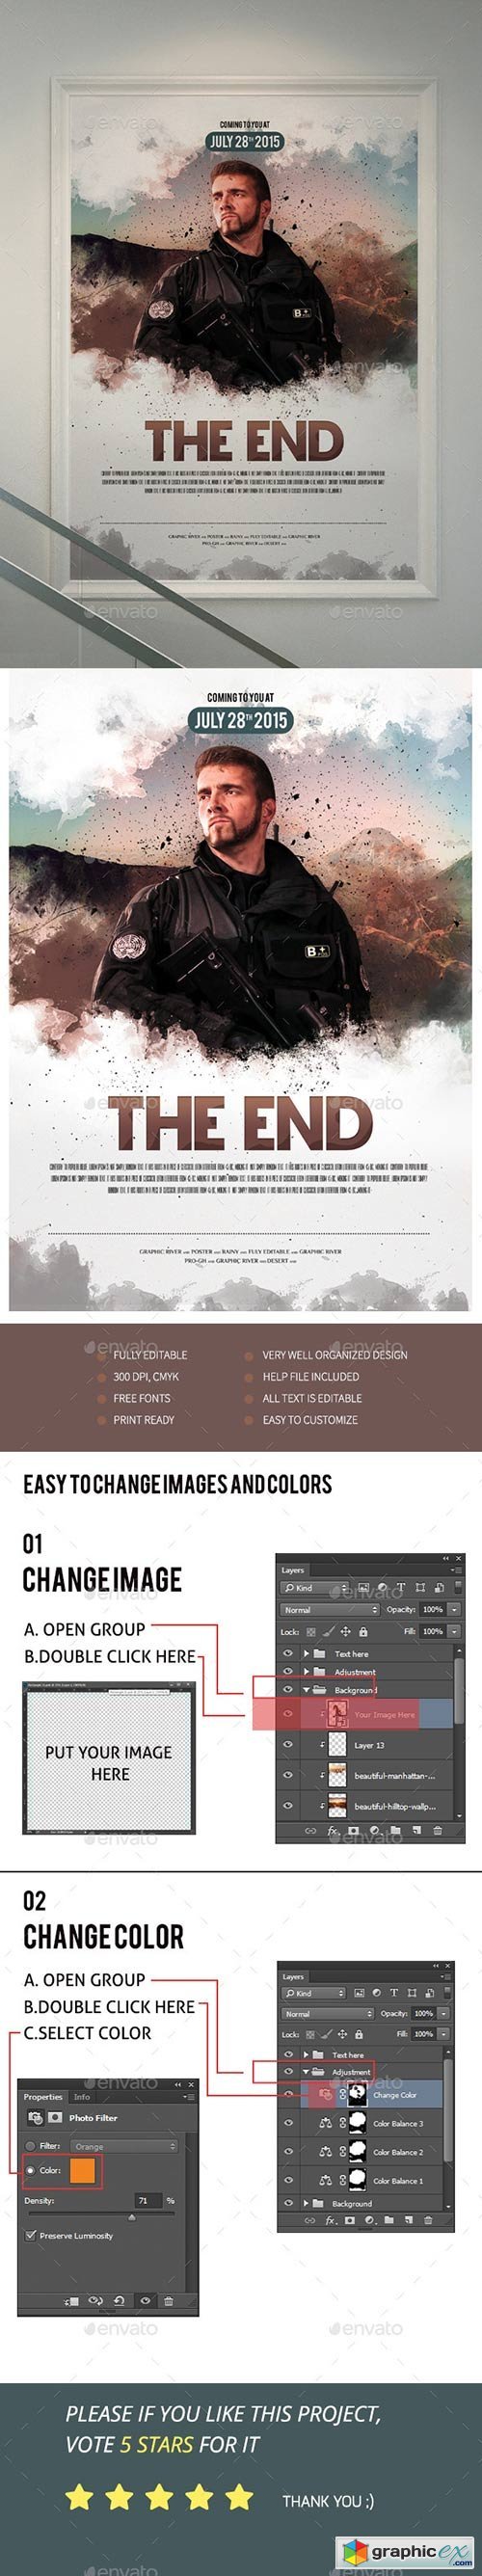 The End Movie Poster/Flyer II